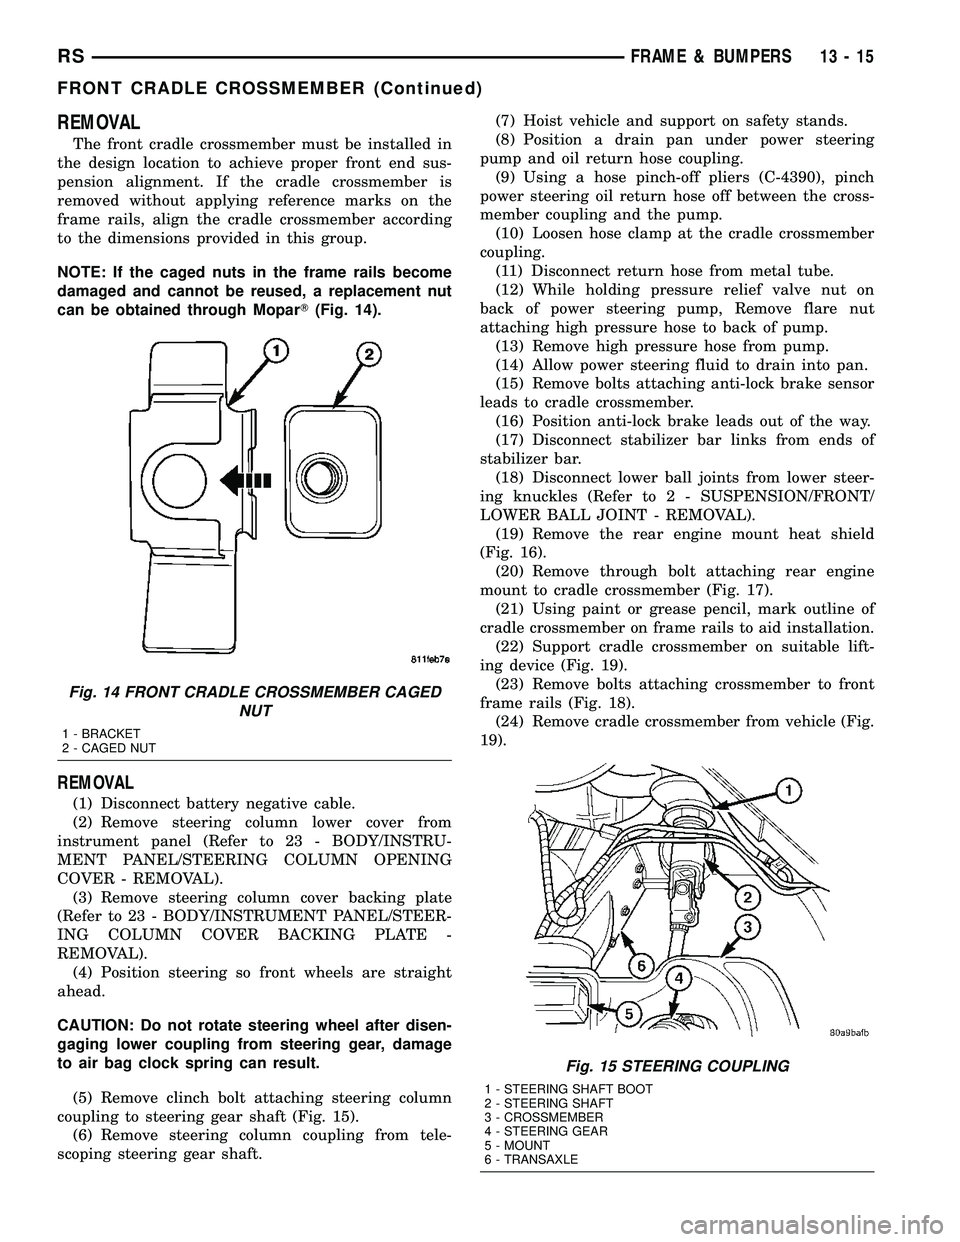 CHRYSLER VOYAGER 2005  Service Manual REMOVAL
The front cradle crossmember must be installed in
the design location to achieve proper front end sus-
pension alignment. If the cradle crossmember is
removed without applying reference marks 